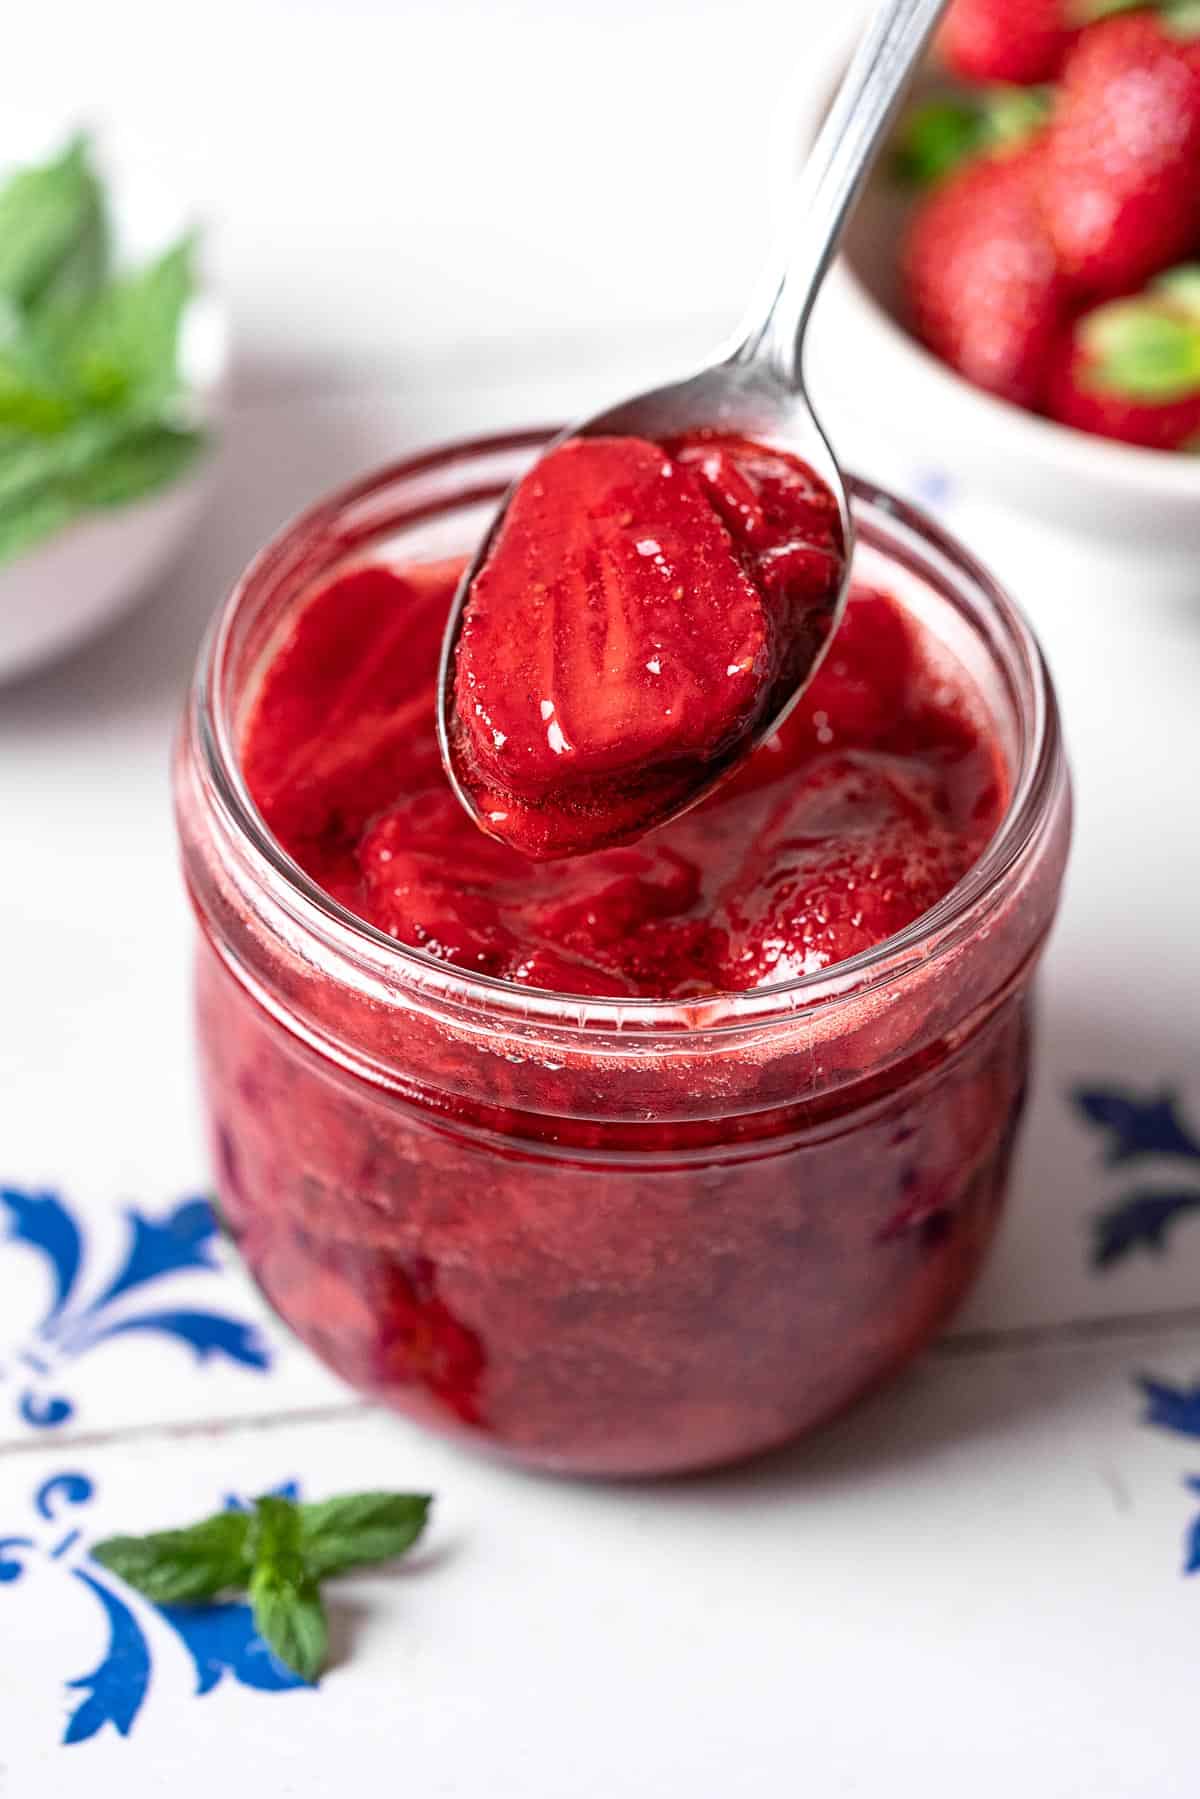 a spoonful of strawberry compote being lifted from a jar of strawberry compote.